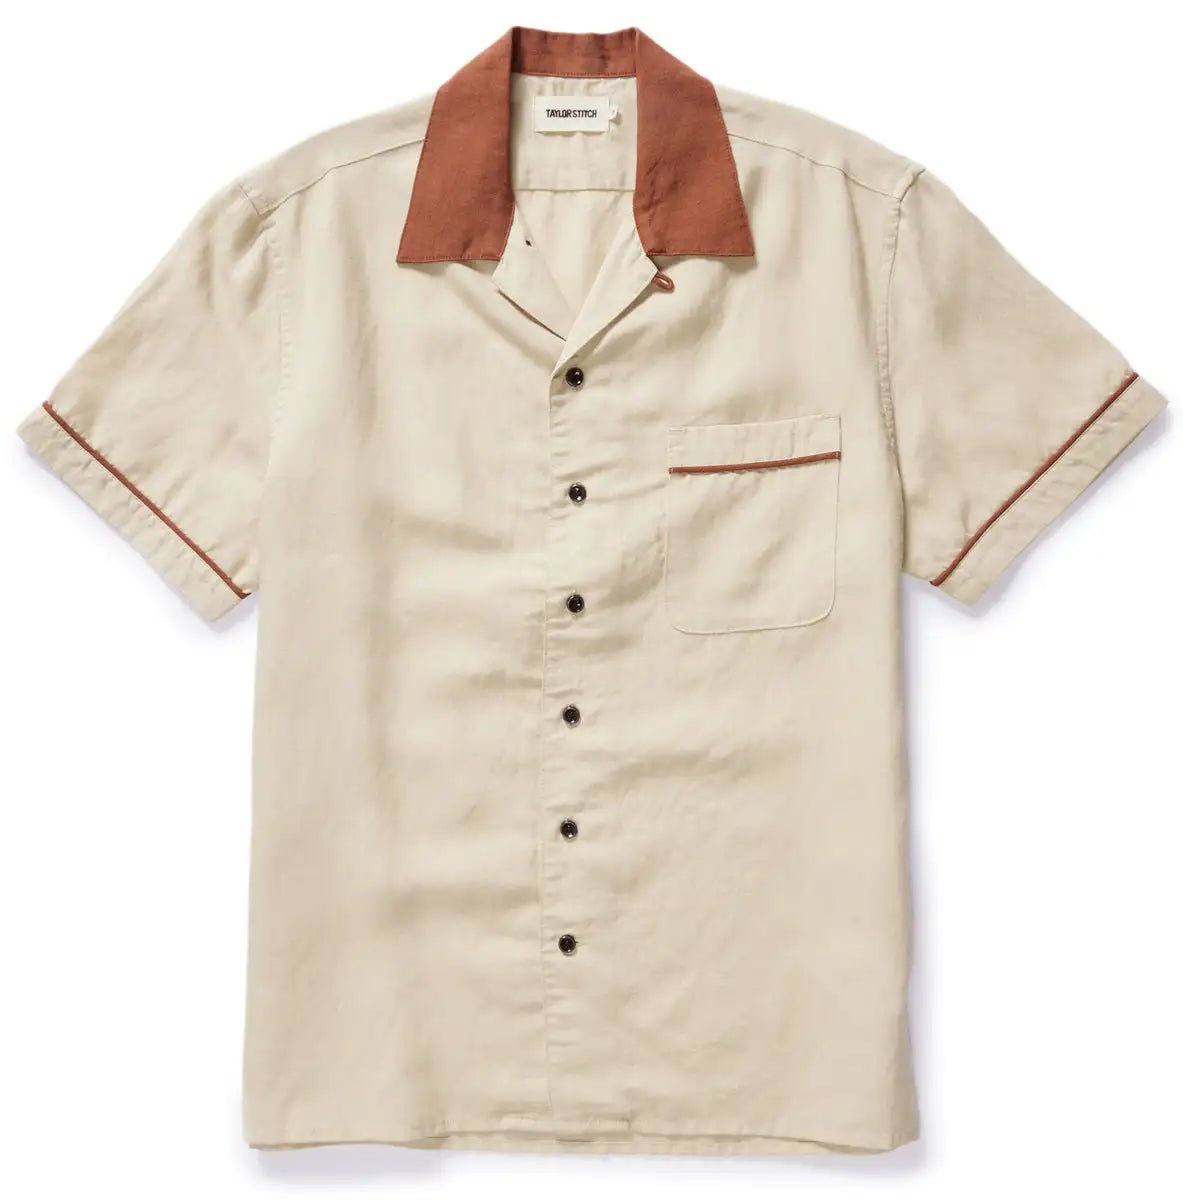 Taylor Stitch - TAYLOR STITCH THE PALMER SHIRT IN DUNE - Rent With Thred